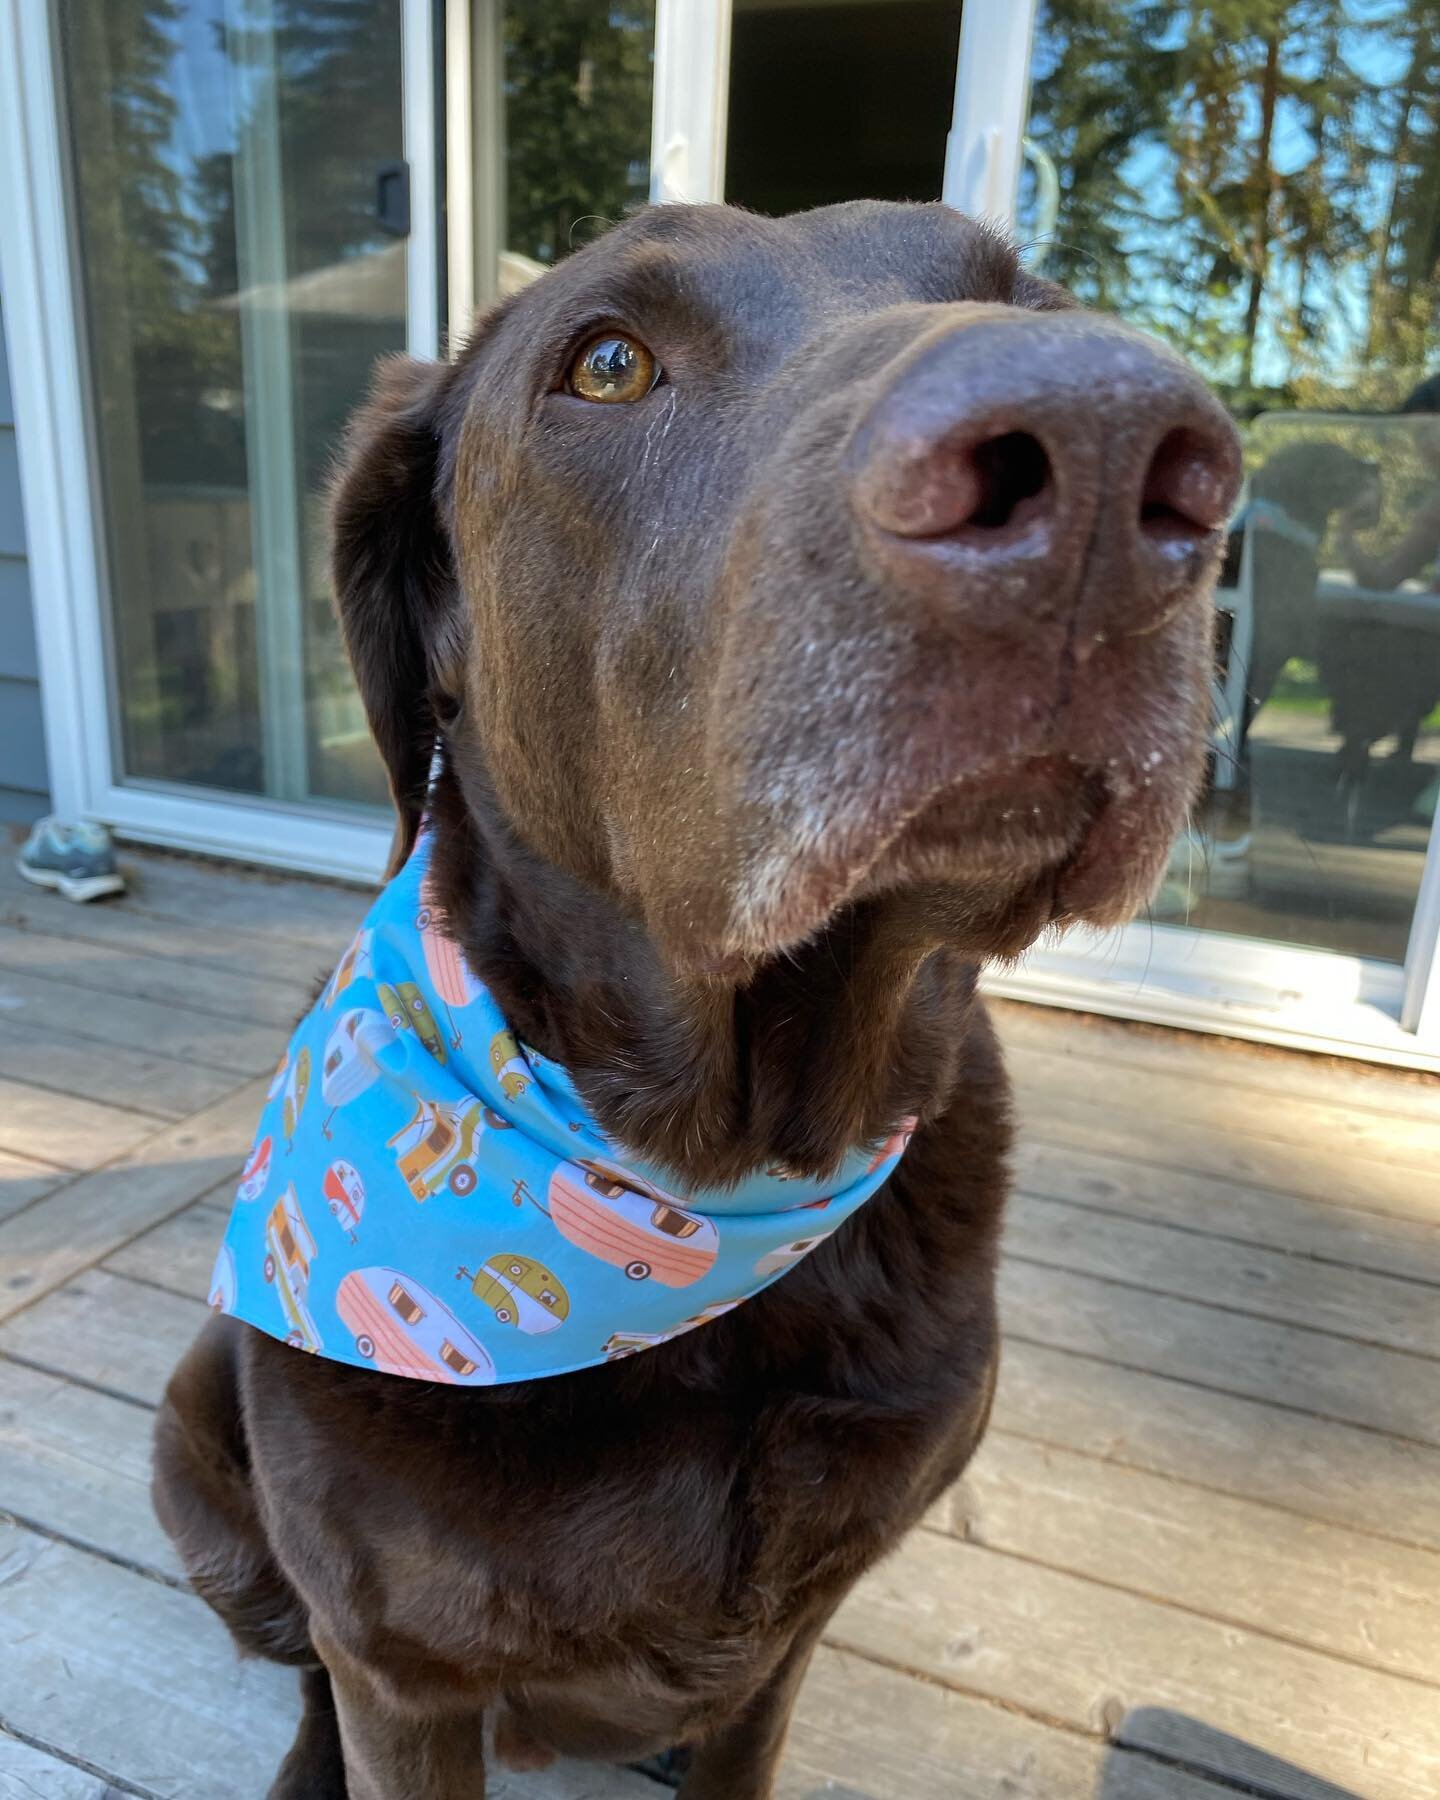 Summer bandanas are here! For now, we have some beautiful camping themed ones; more to come soon....🏕